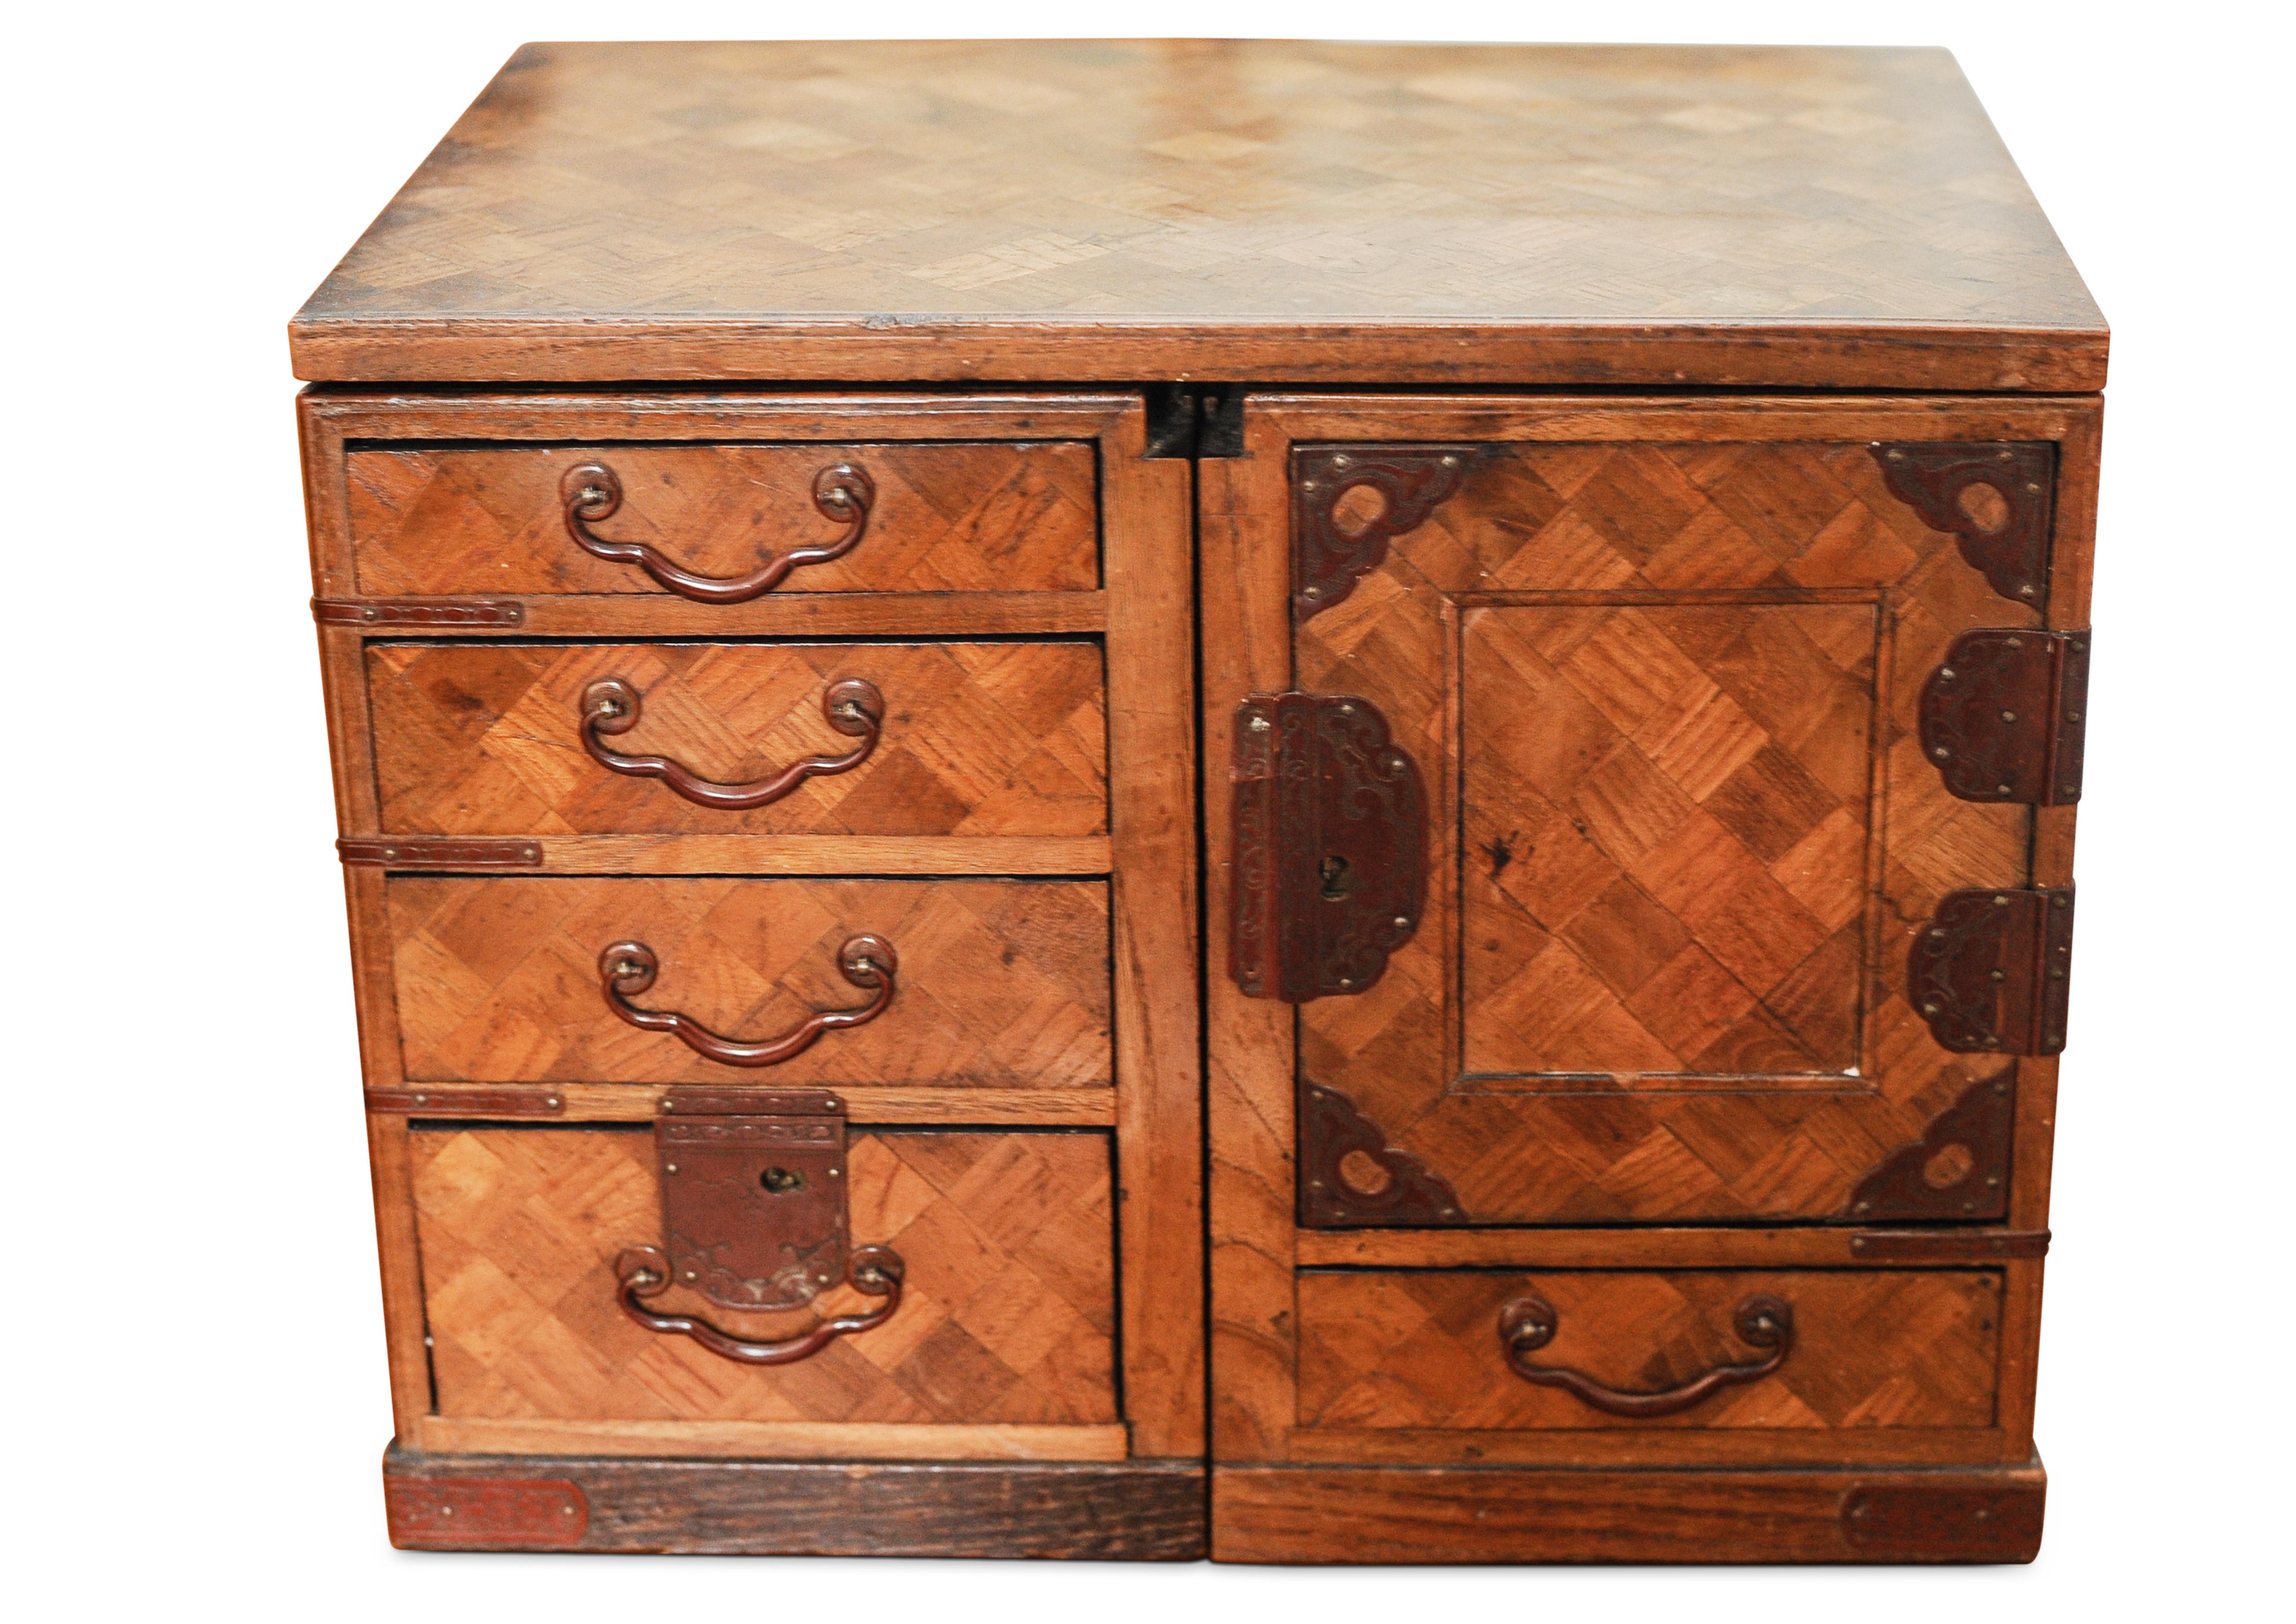 19th Century Japanese Meiji Period Parquetry Table Top Kodansu Cabinet With An Arrangement of Seven Drawers & Metal Handles & Finishings
